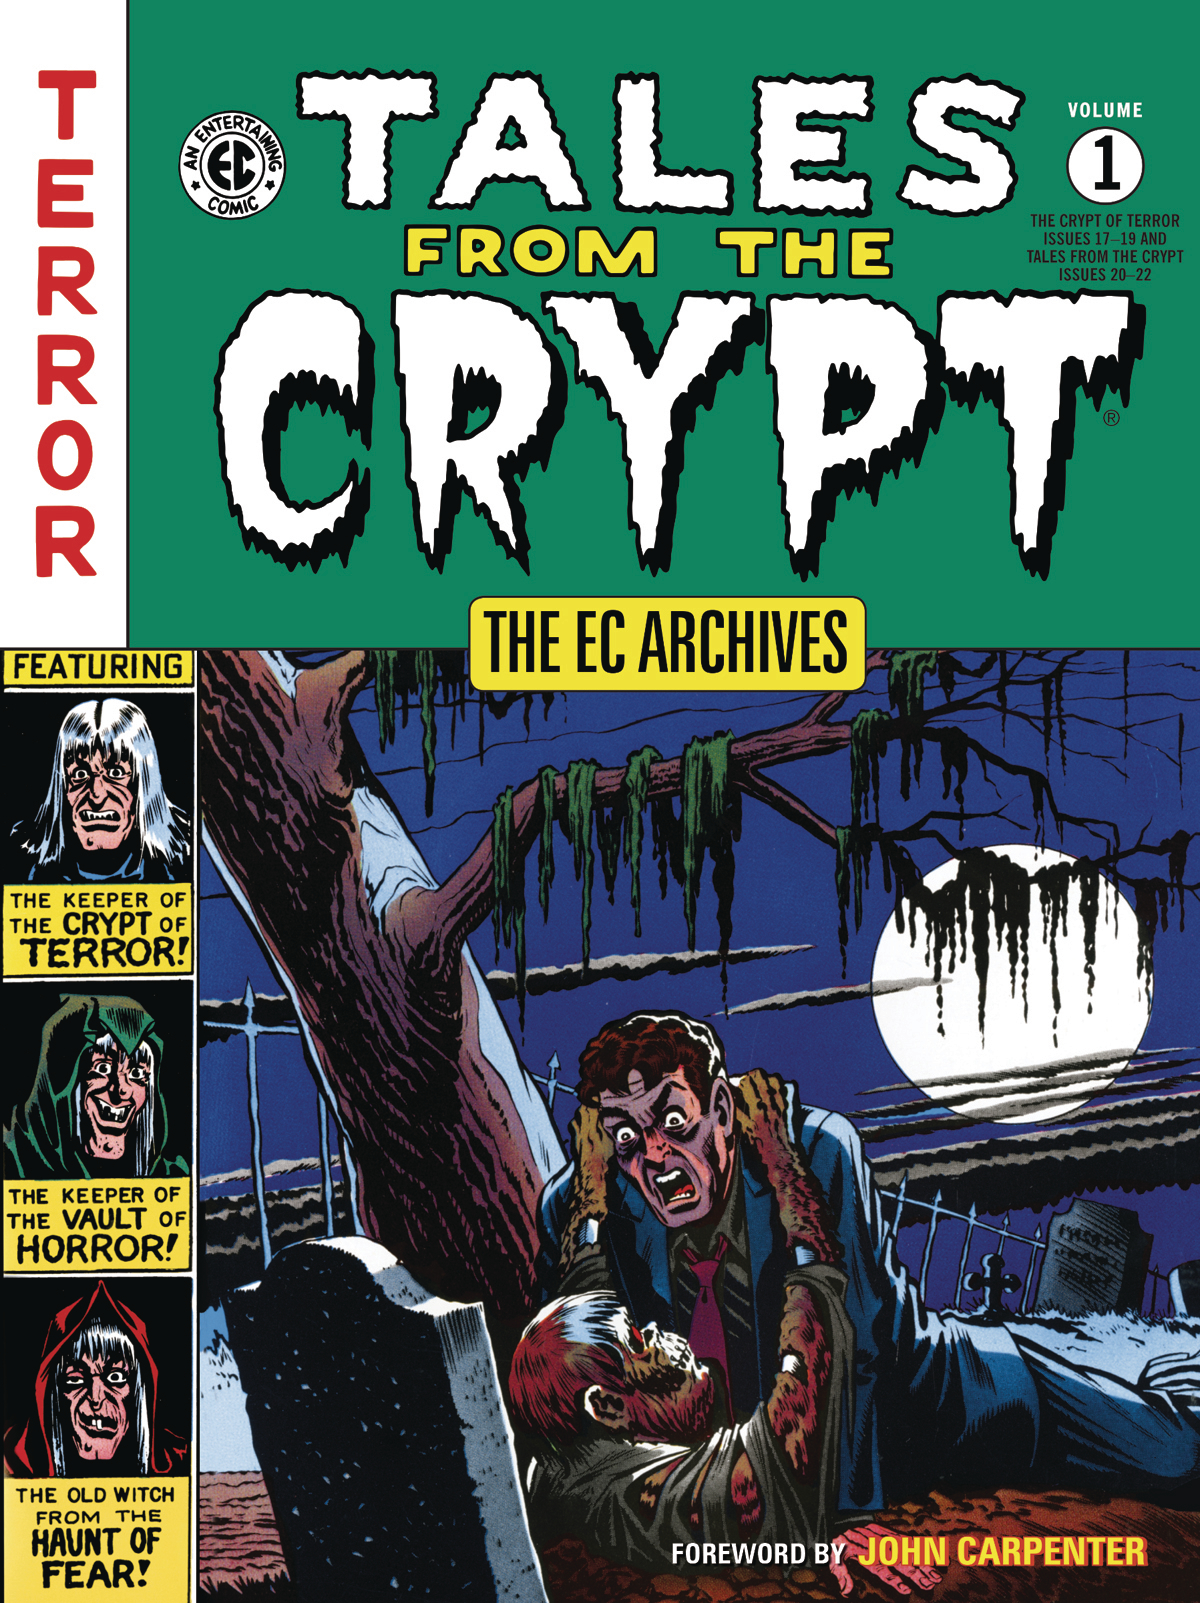 EC Archives Tales from Crypt Graphic Novel Volume 1 (Mature)